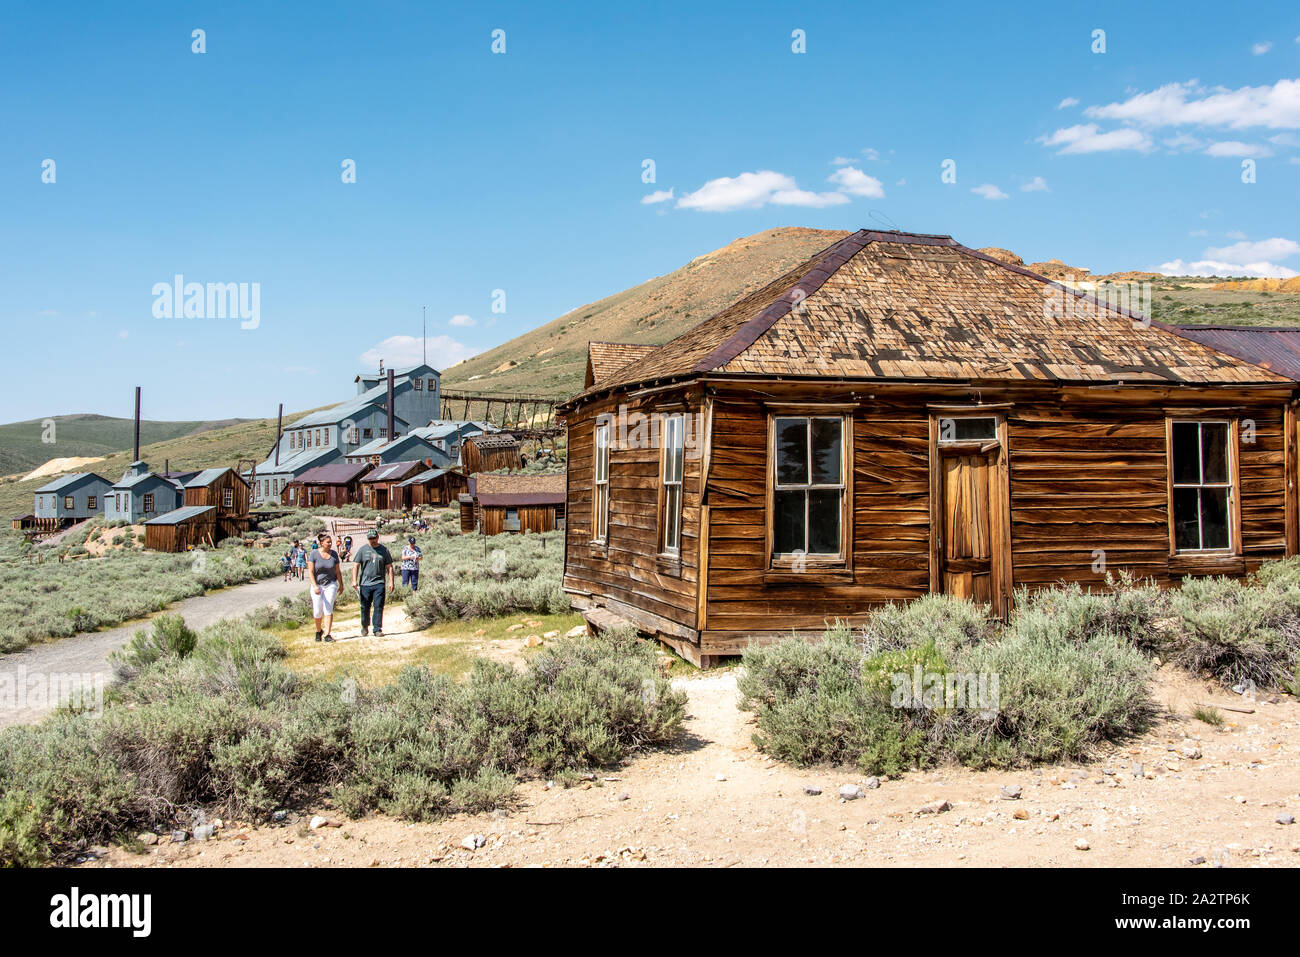 People explore Bodie State Historic Park with the Standard Consolidated Mining Company Stamp Mill in the background and an old wooden house beside the Stock Photo